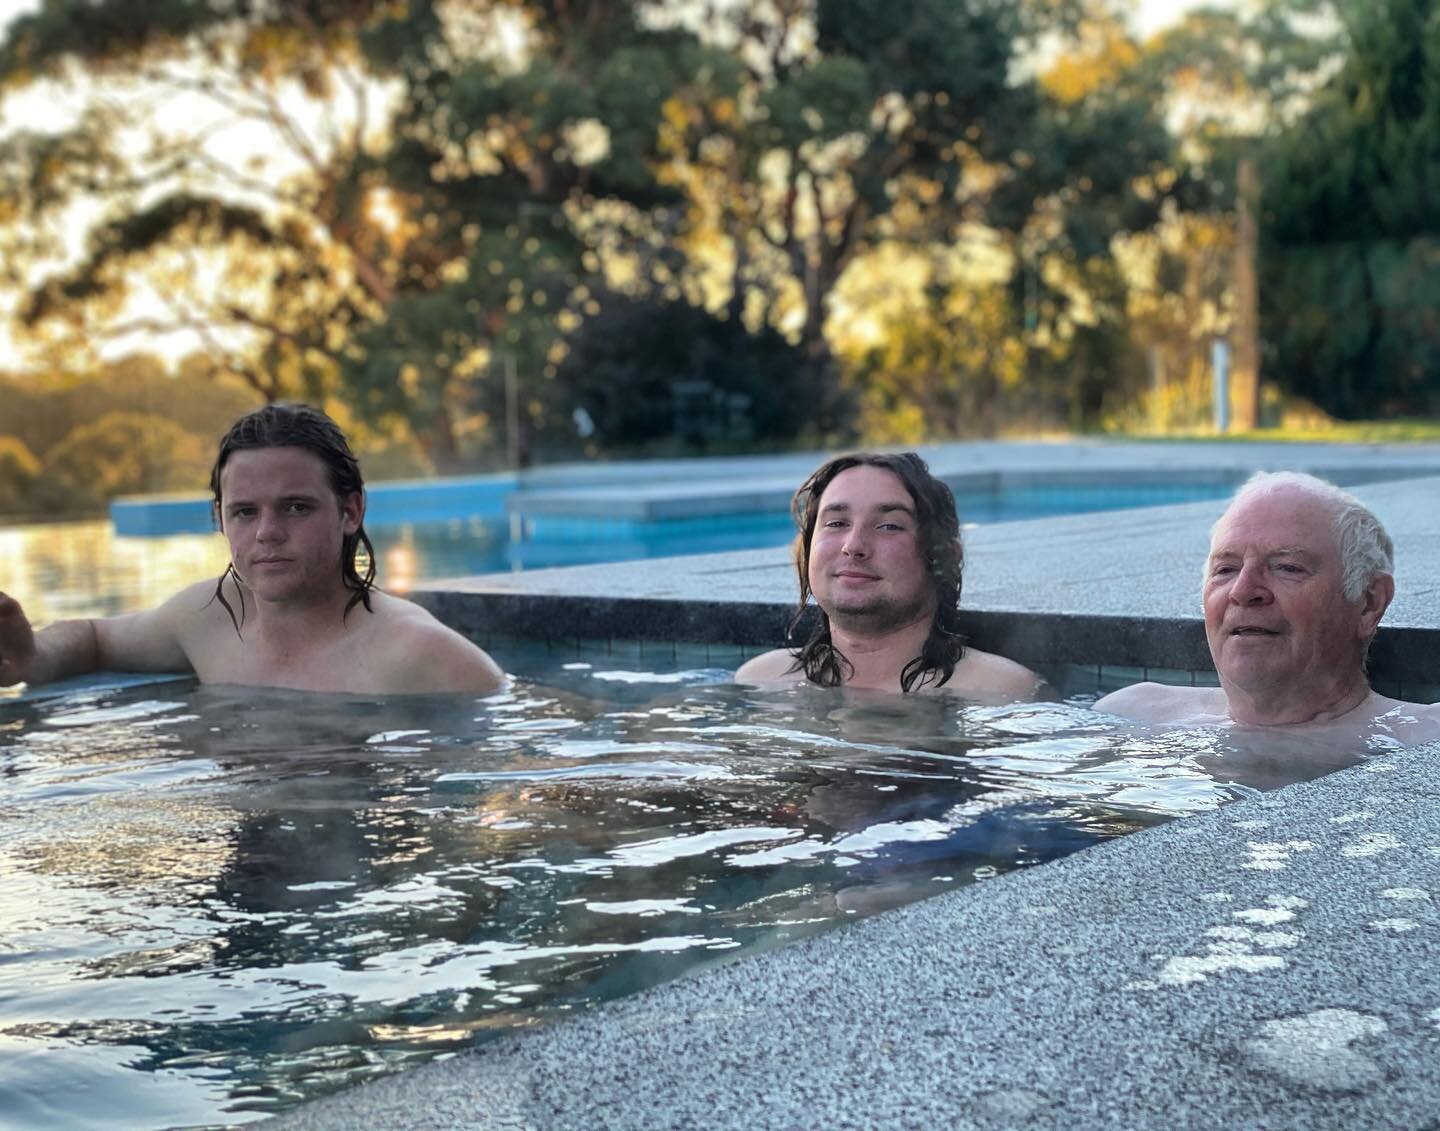 Sunday afternoon wind down...
#graysonsestate #sunday #afternoon #weekend #hottubgoals #theboys #luxuryliving #groupaccommodation #country #victoria